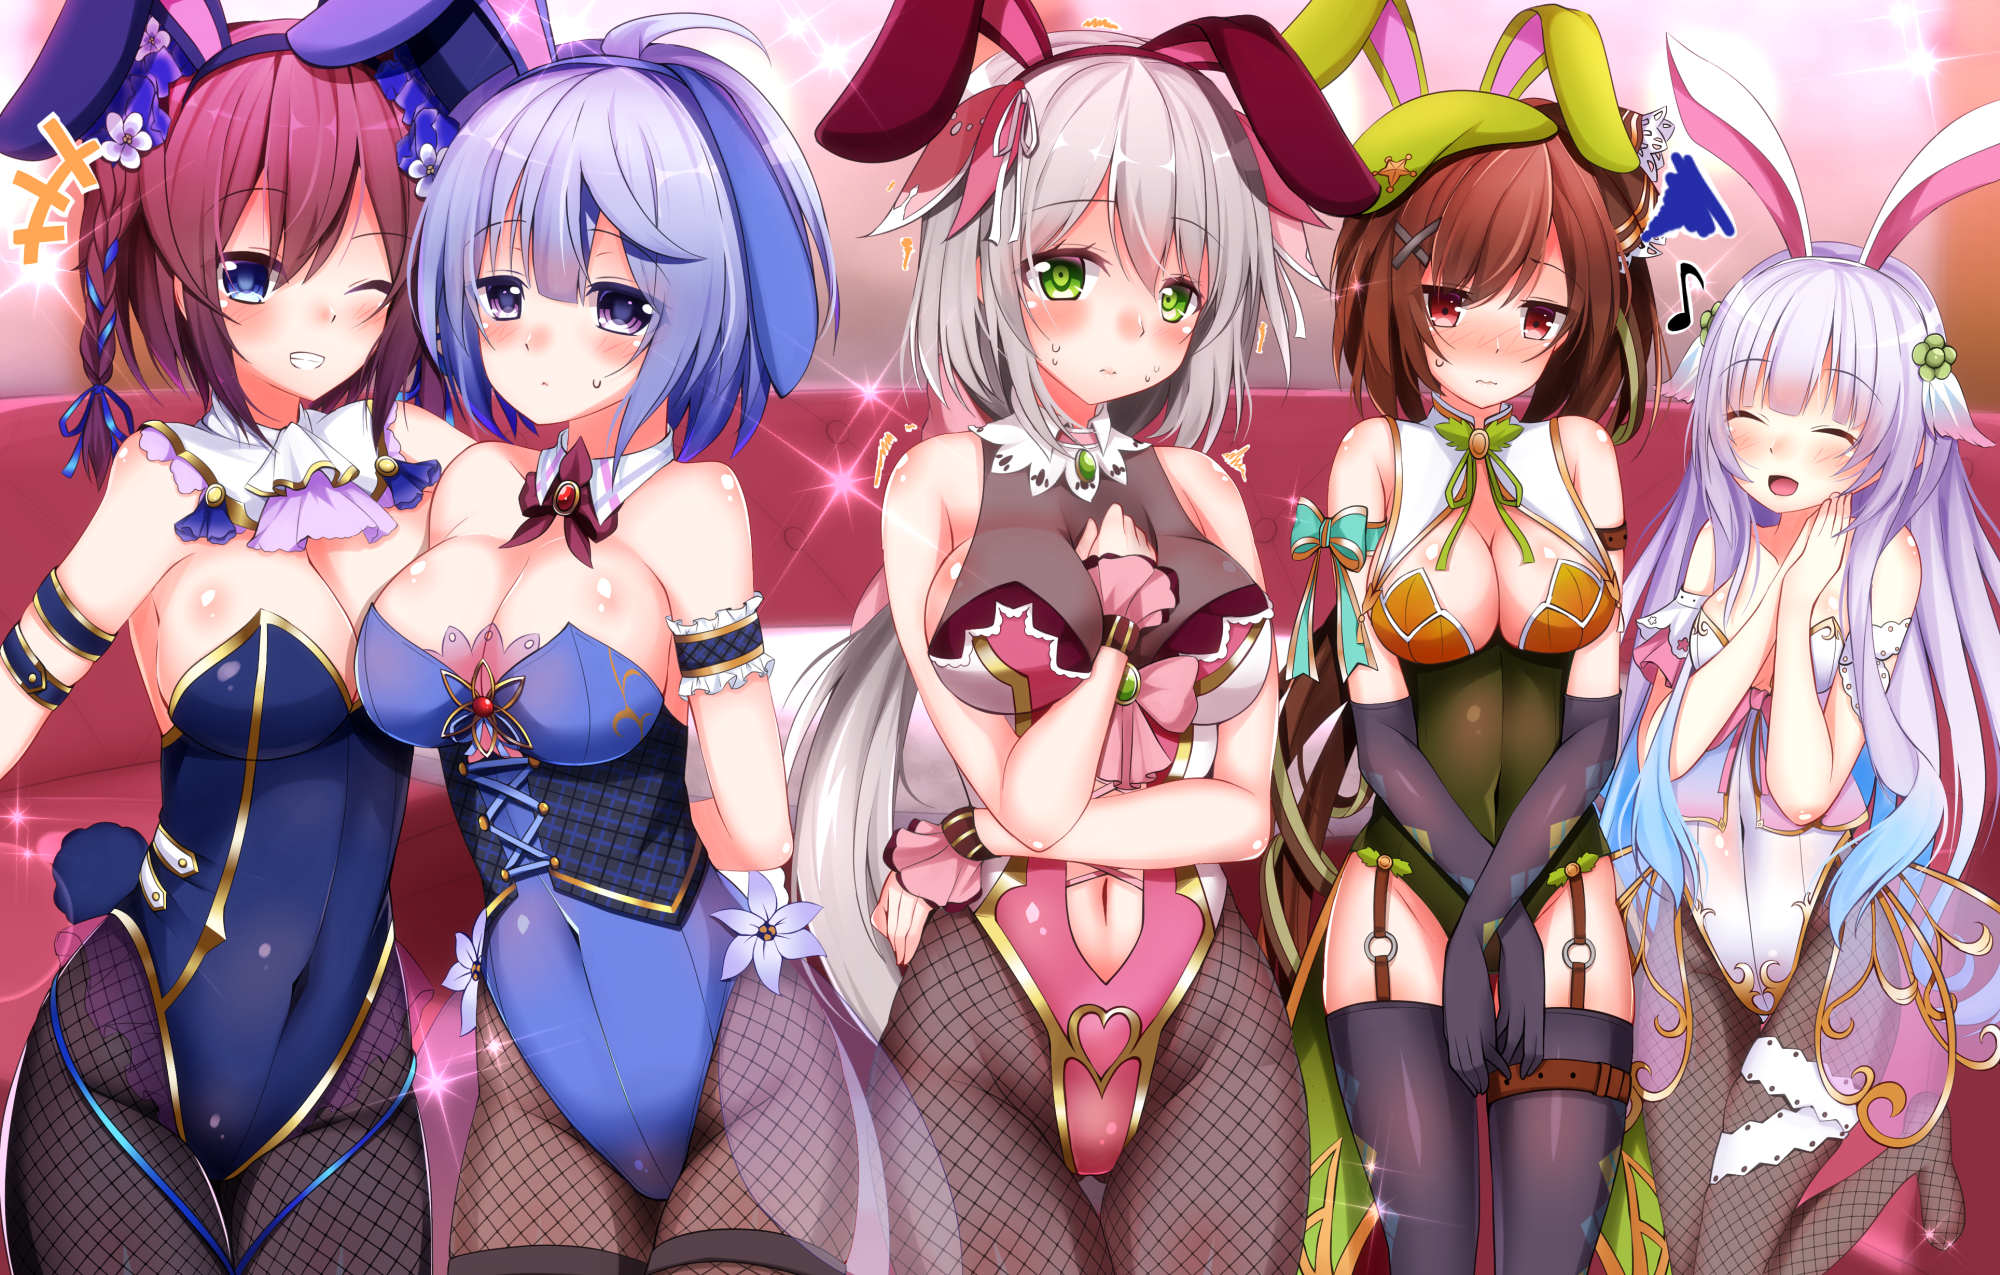 Anime 2000x1275 Flower Knight Girl bunny girl bunny suit group of women fishnet pantyhose cleavage thigh-highs blushing anime girls Shironeko Haru fishnet big boobs line-up embarrassed bright